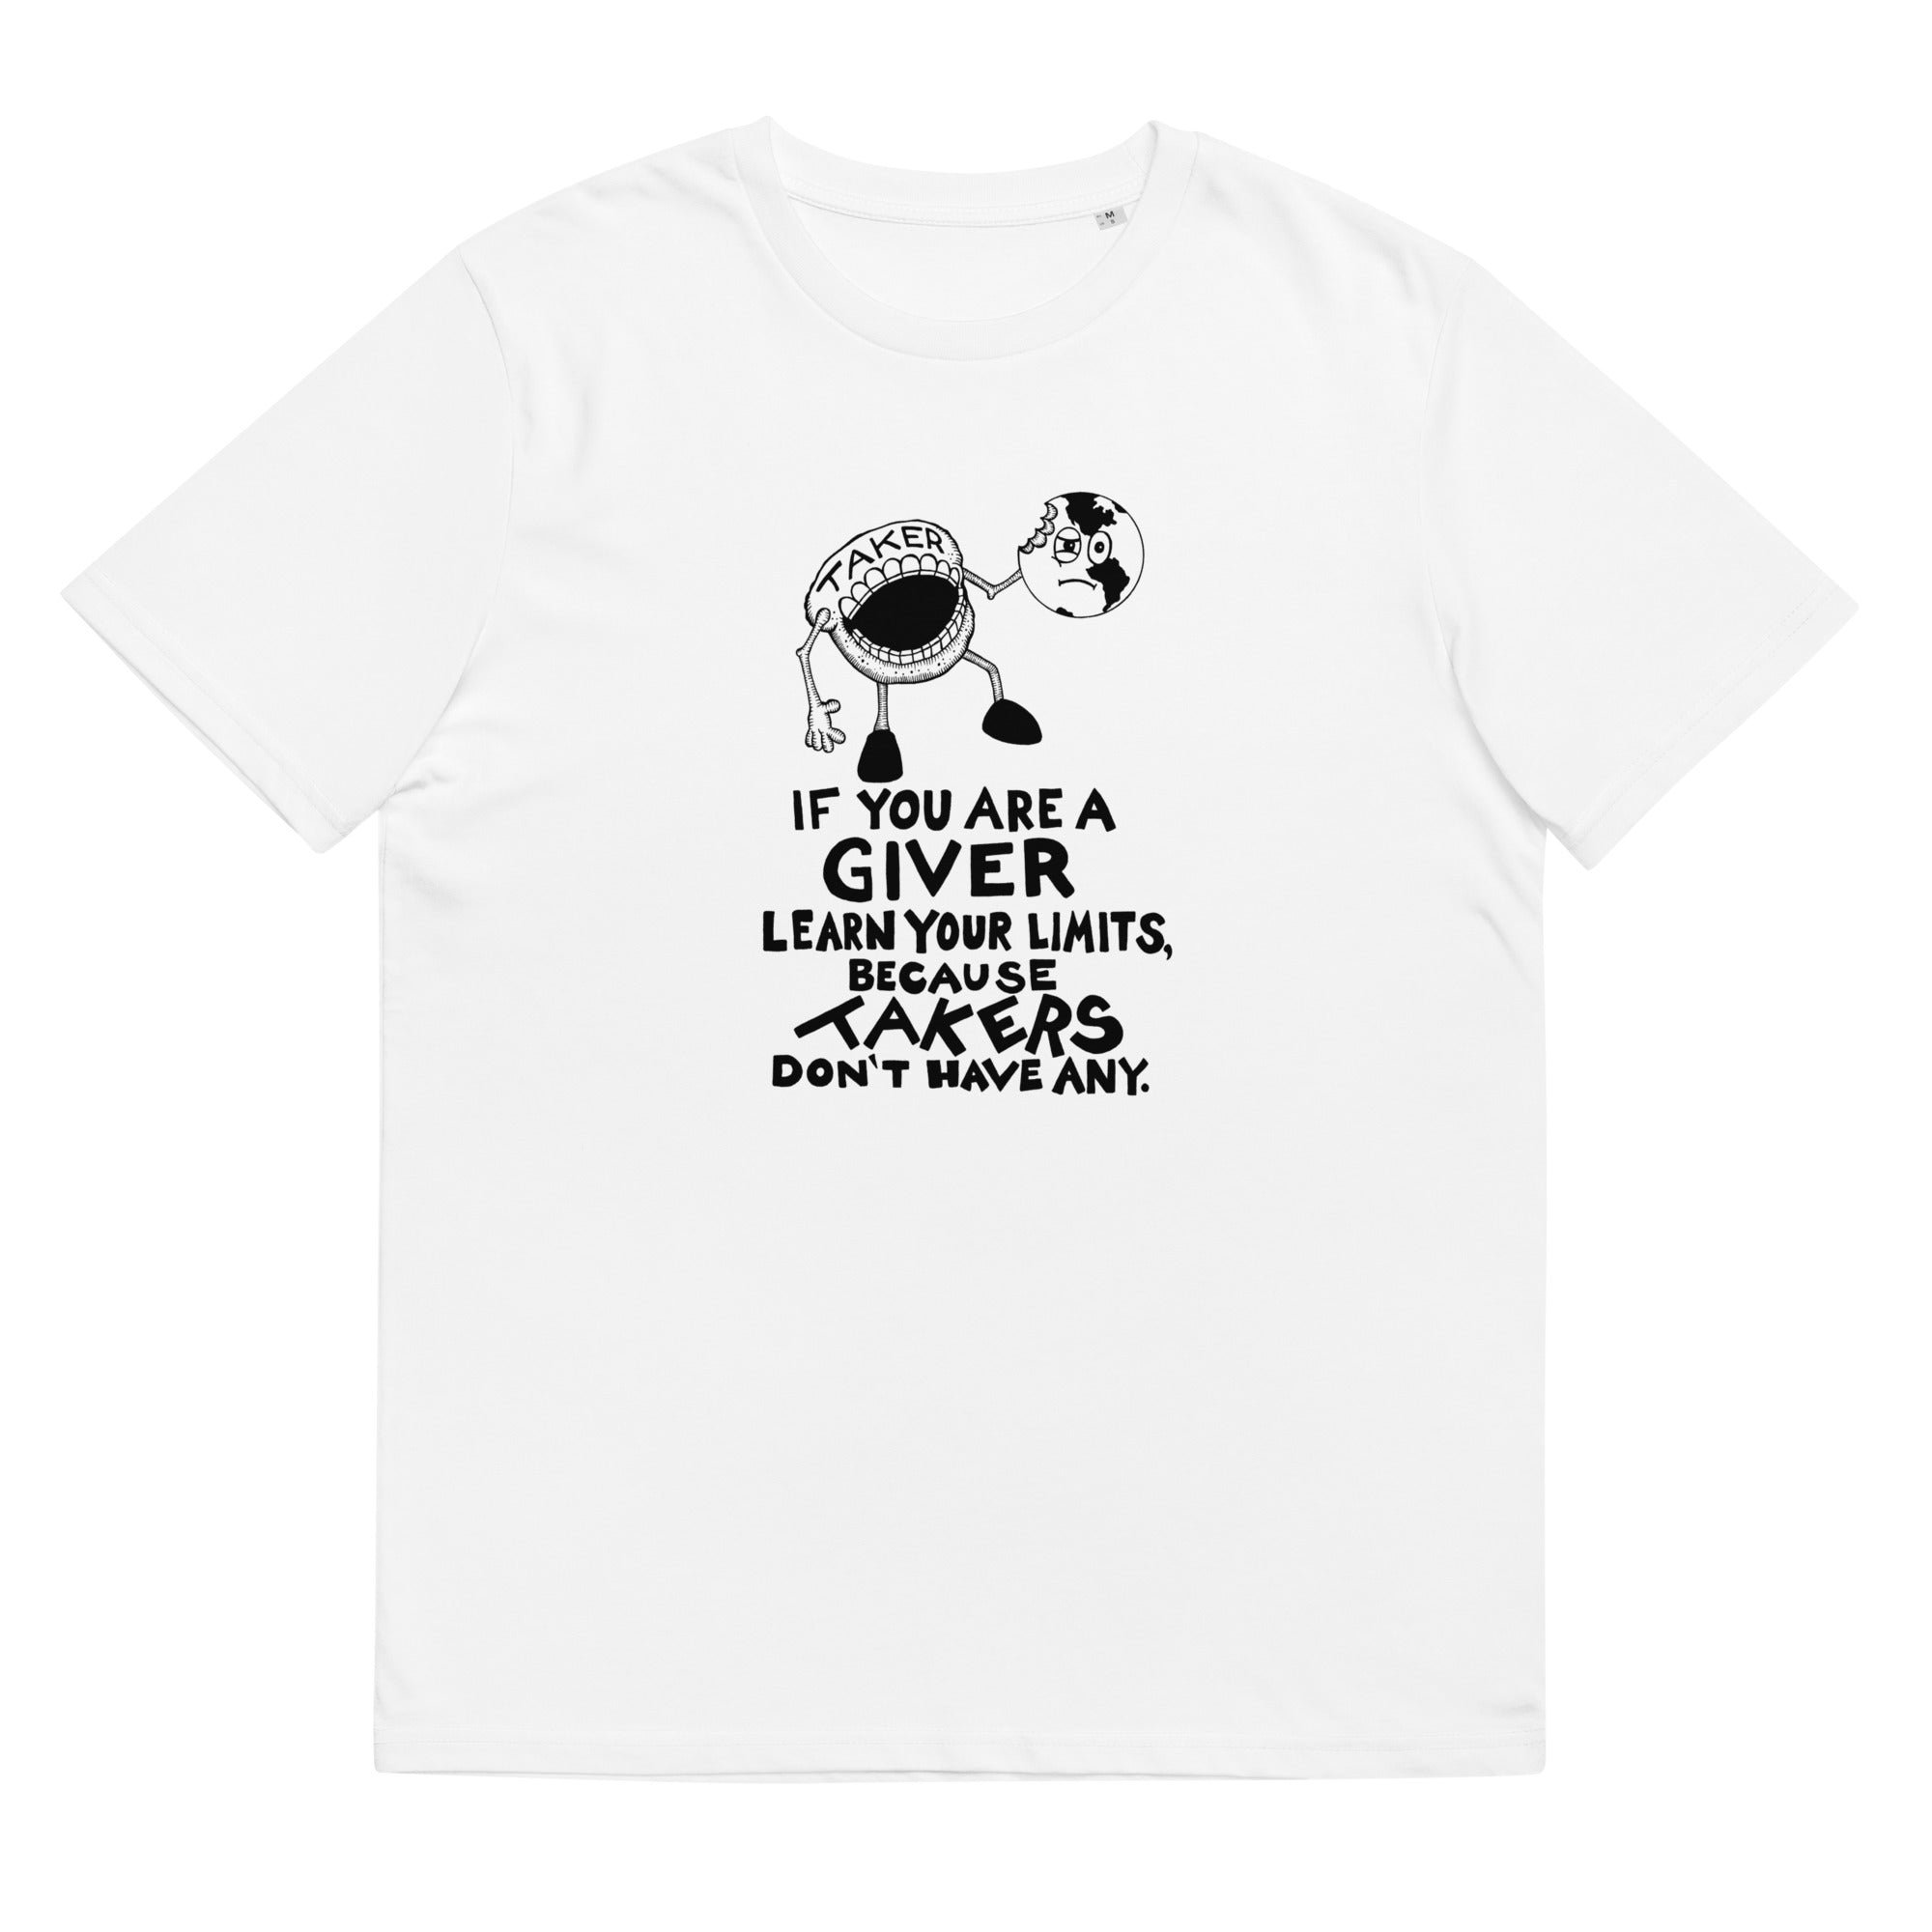 The Taker Organic Cotton Gender Neutral Crew Neck T-Shirt In White by Artist Rick Frausto